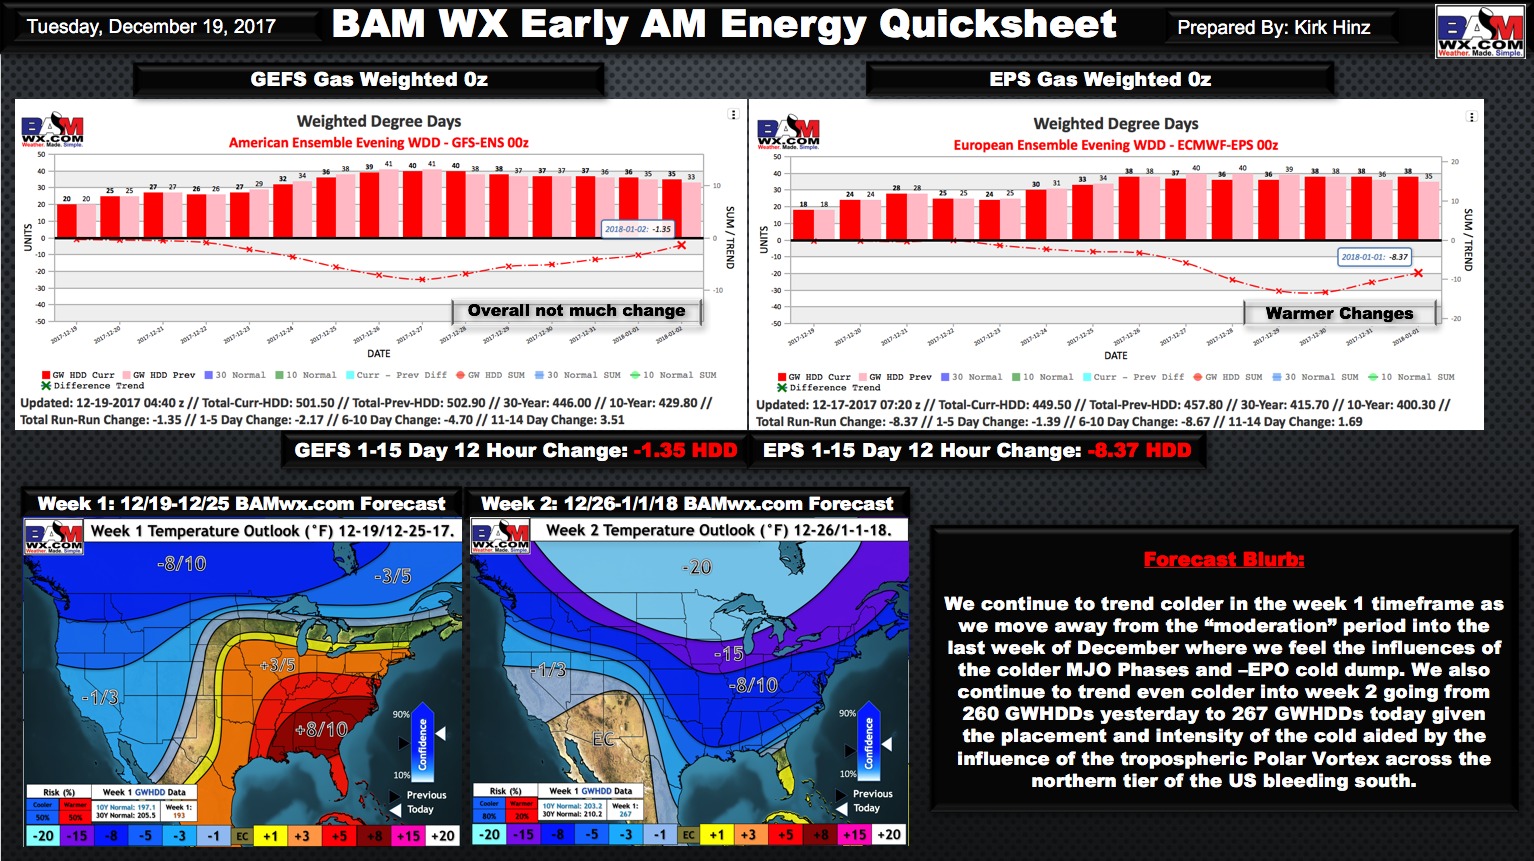 12-19-17 Early Morning Energy & Power Check-Up. Colder Trends Continue Next 2 Weeks. K.